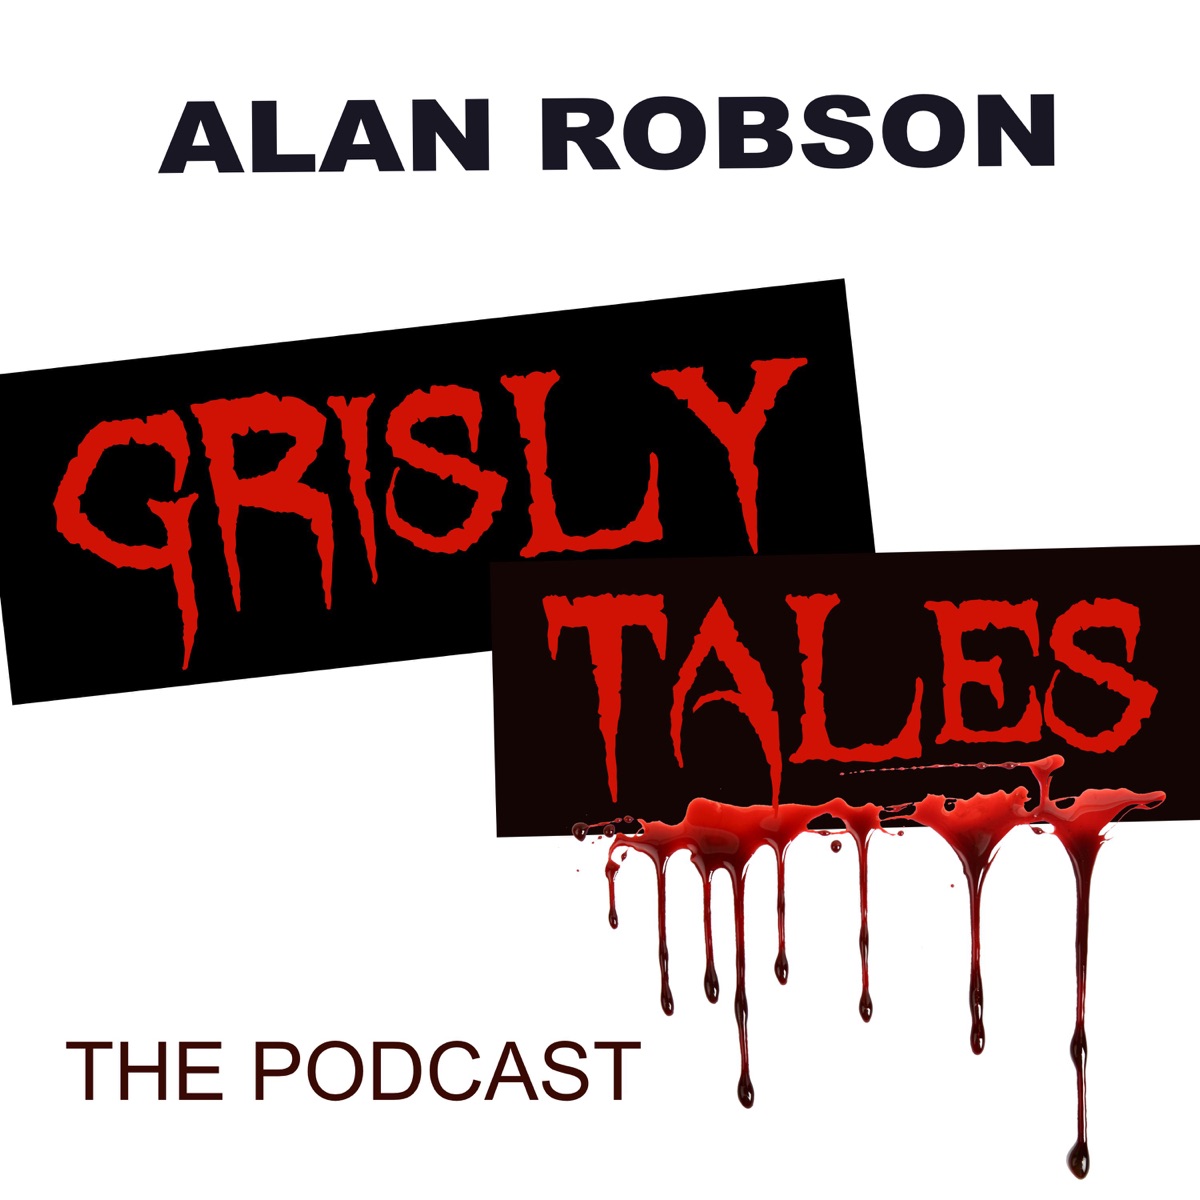 Alan Robson's Grisly Tales